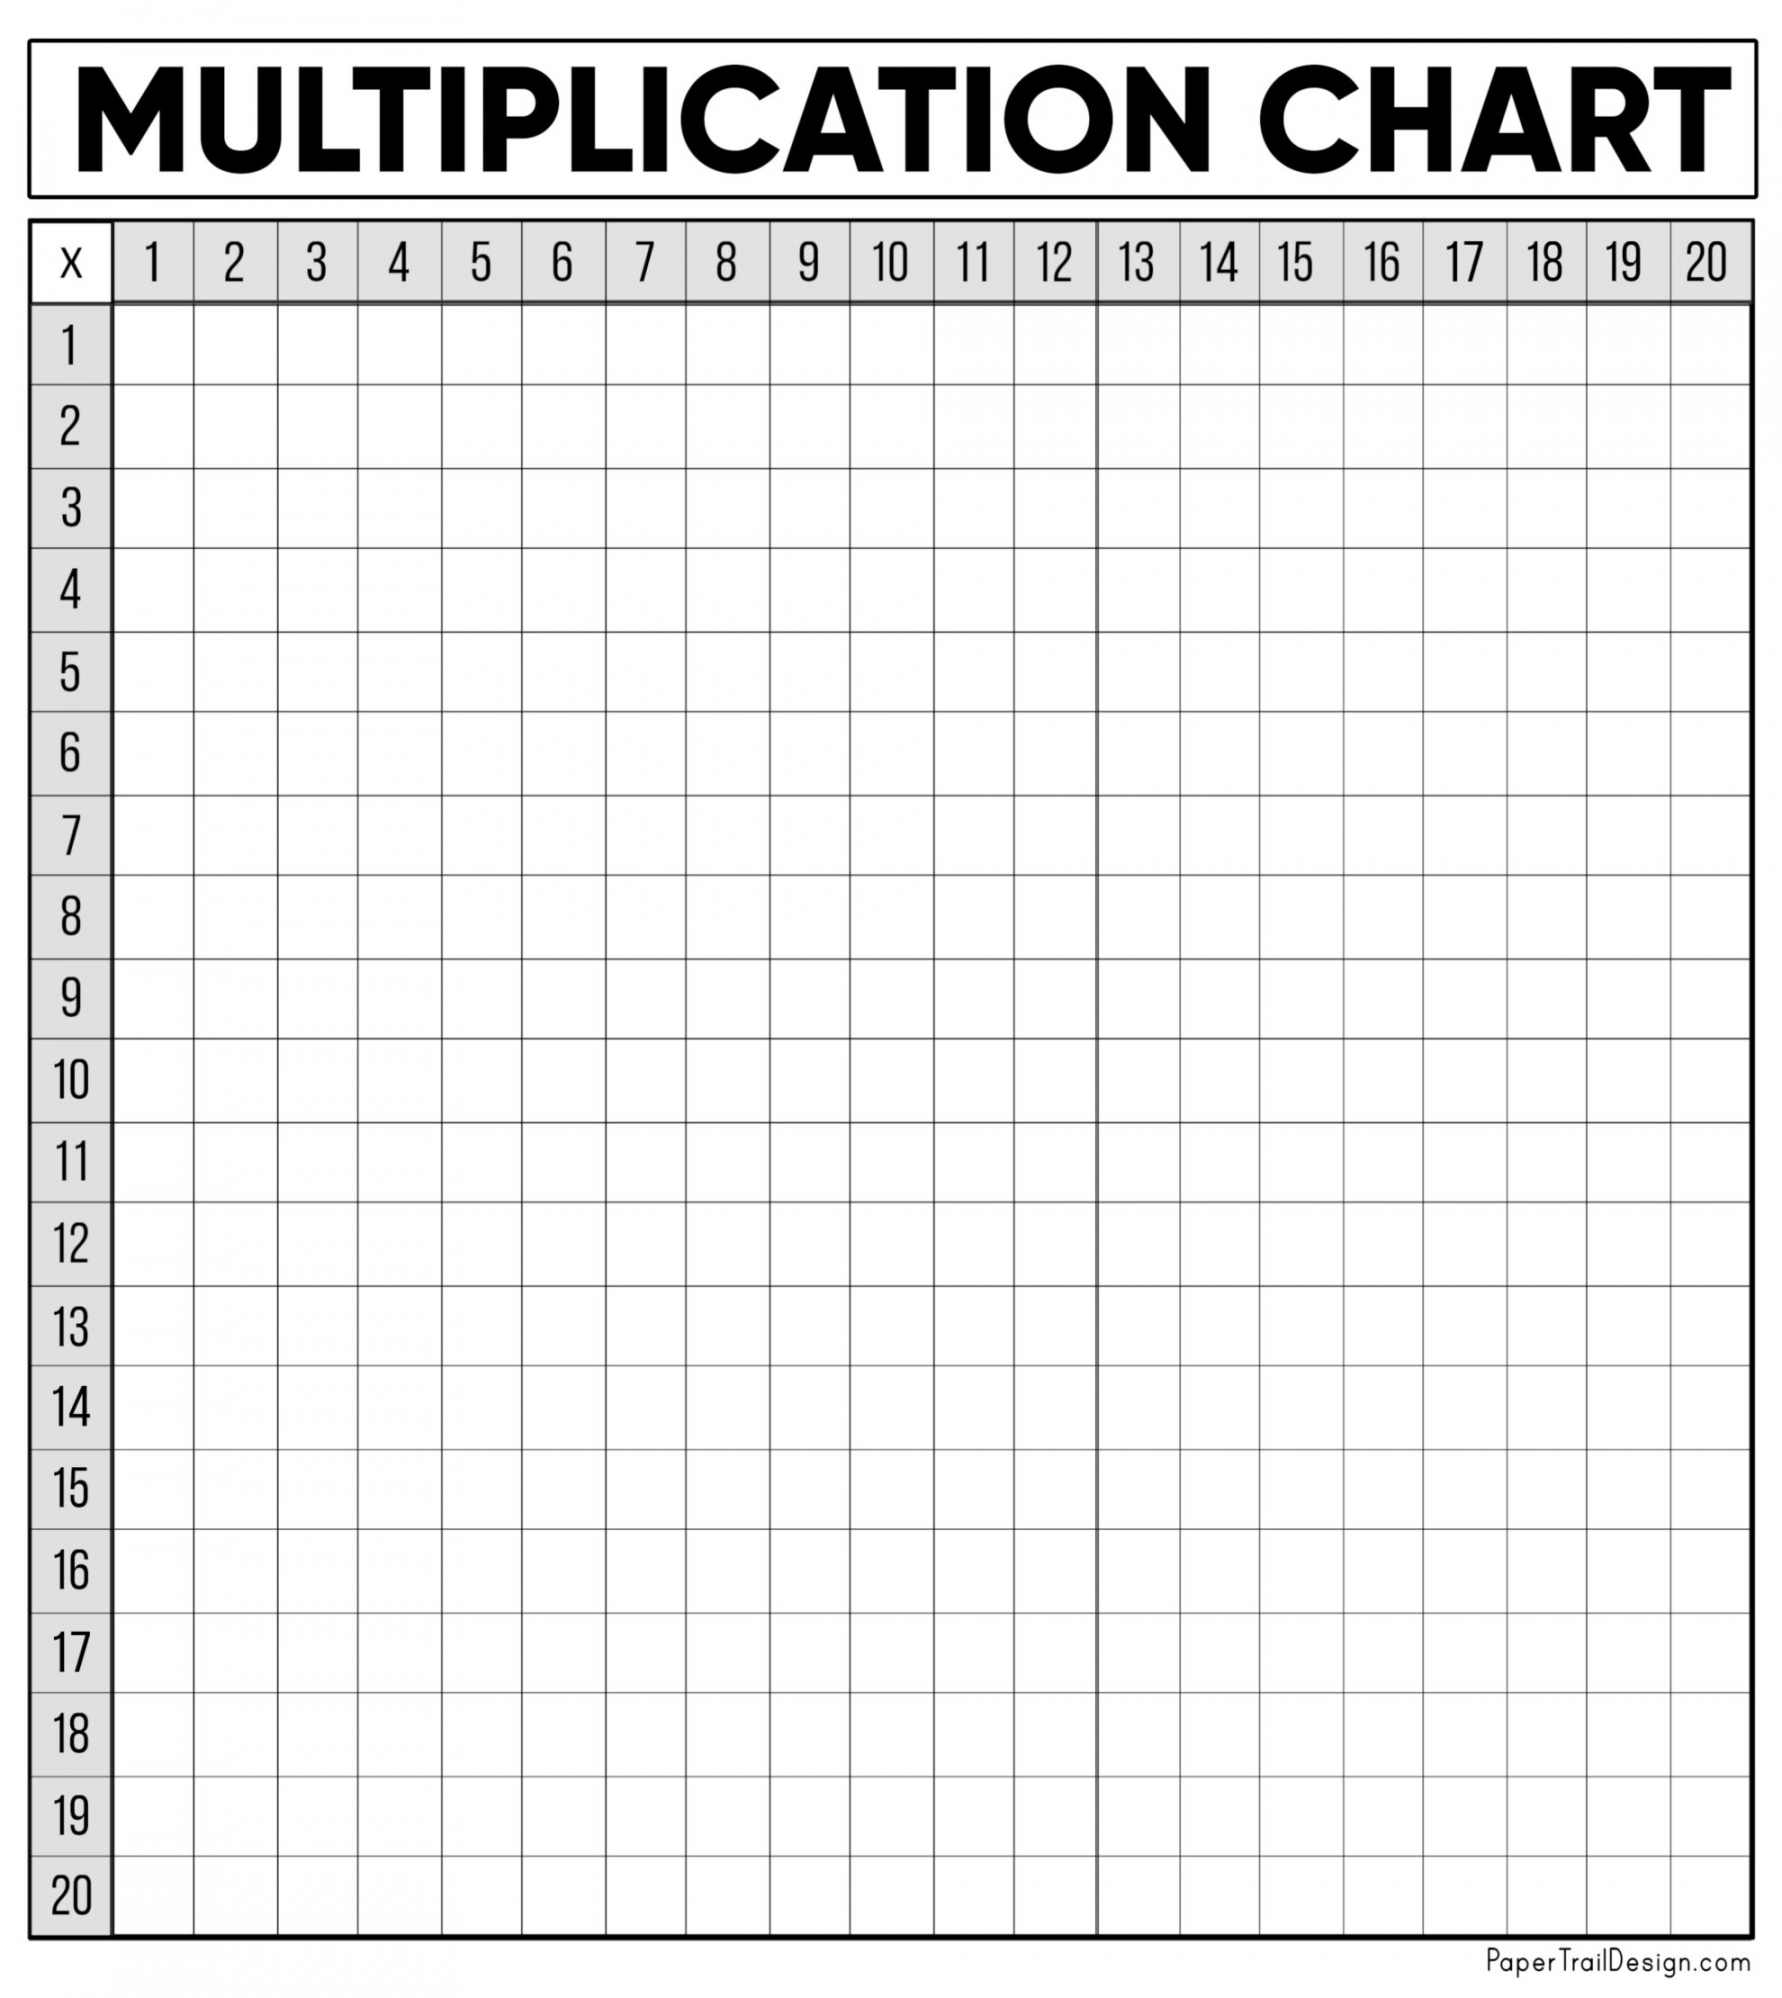 Free Multiplication Chart Printable - Paper Trail Design - FREE Printables - Free Printable Blank Multiplication Chart